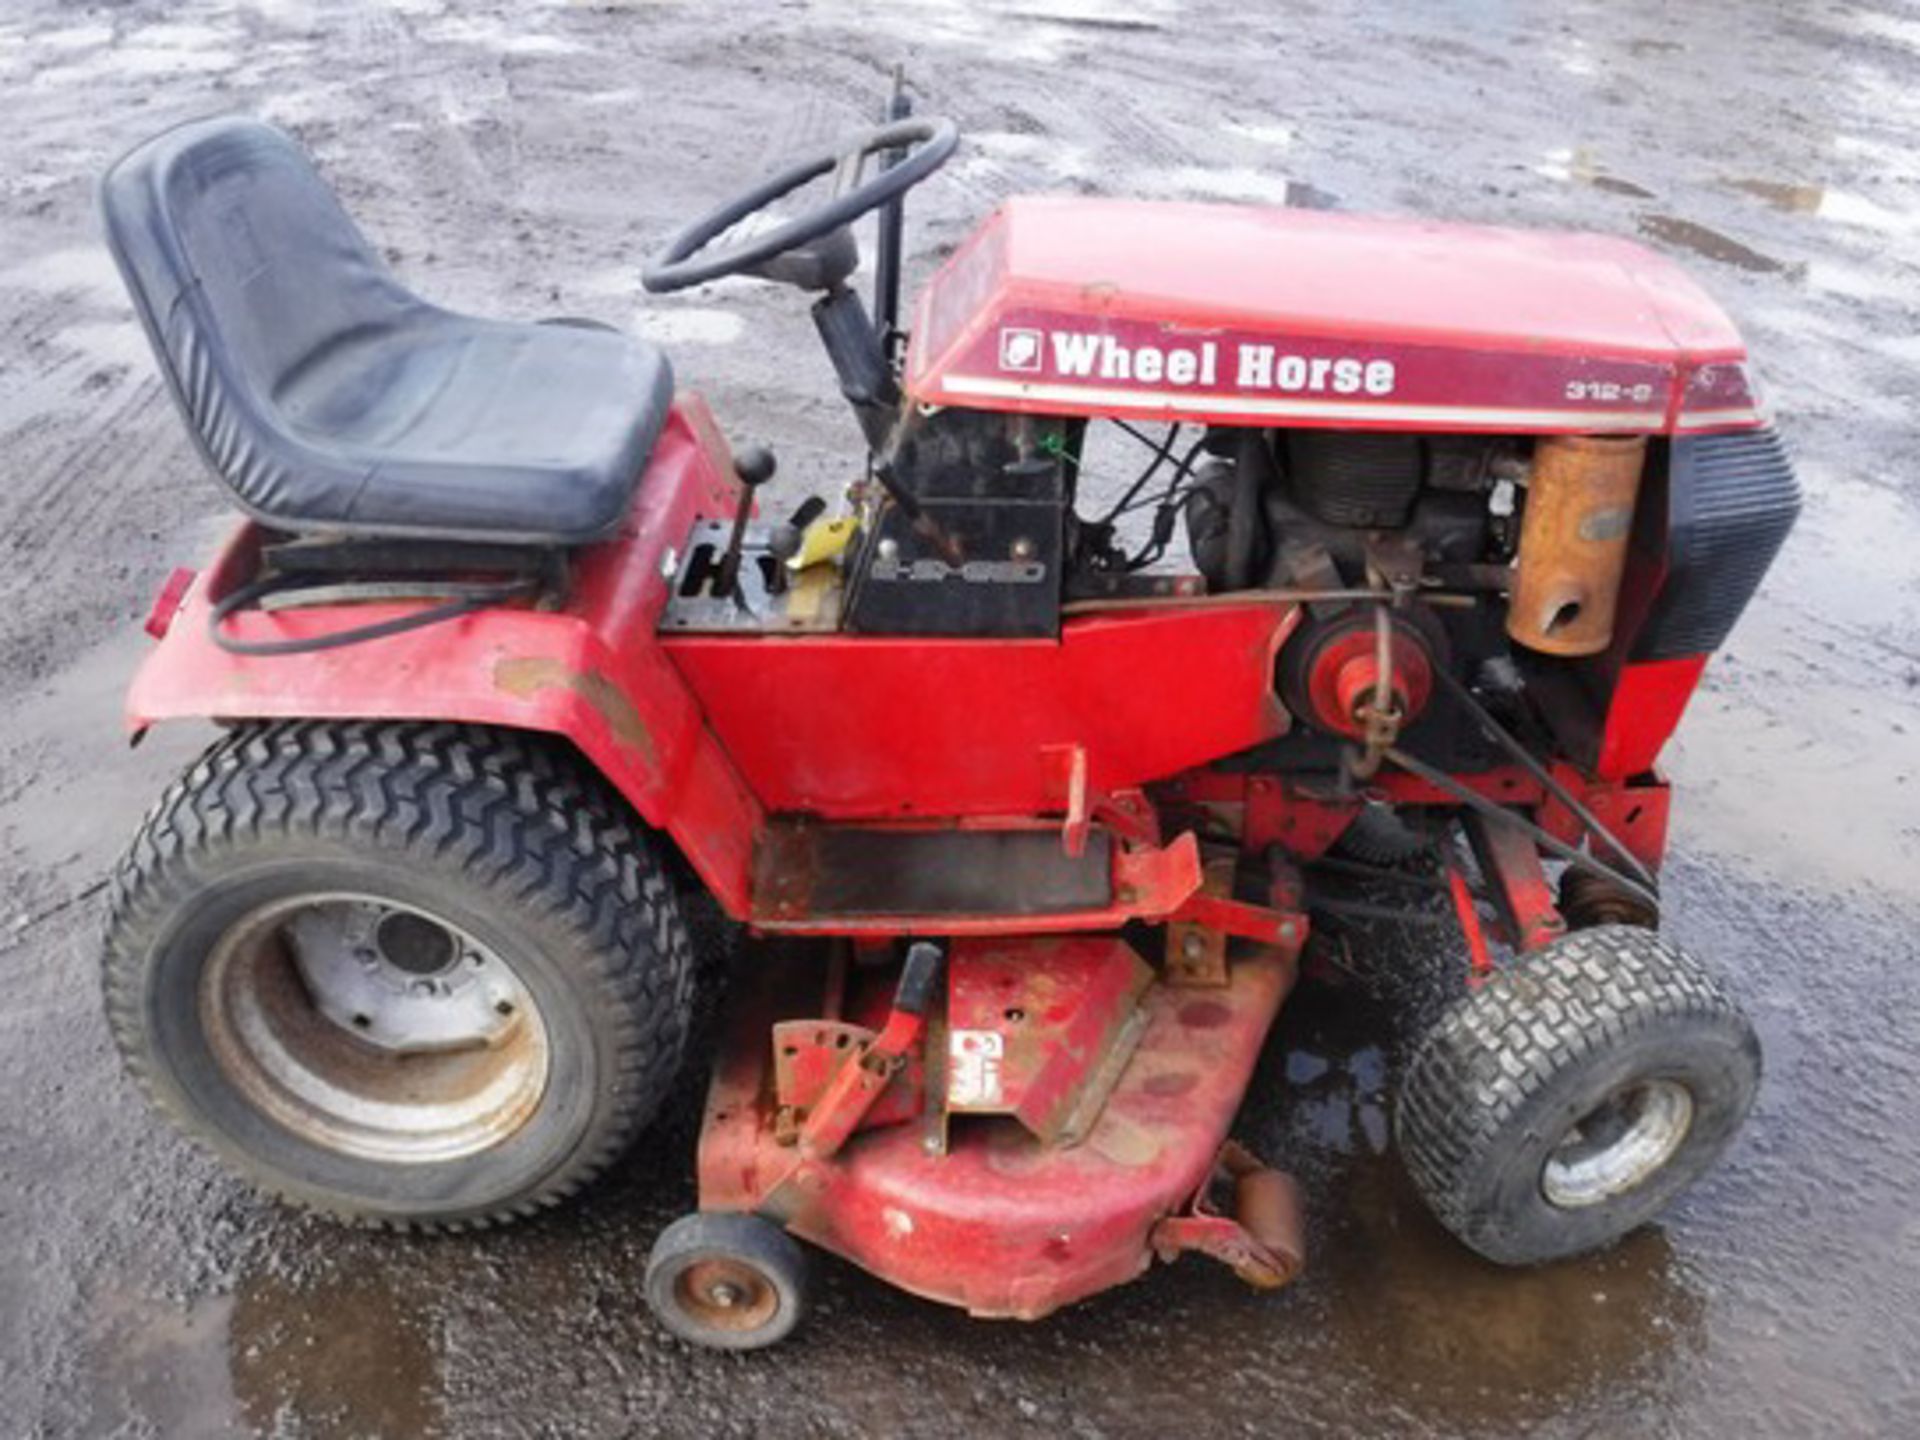 1986 WHEEL HORSE 312.8 LAWN TRACTOR VIN - 21-12K-802-16902, ENGINE NO - 1600649564, 1389HRS (NOT VER - Image 6 of 11